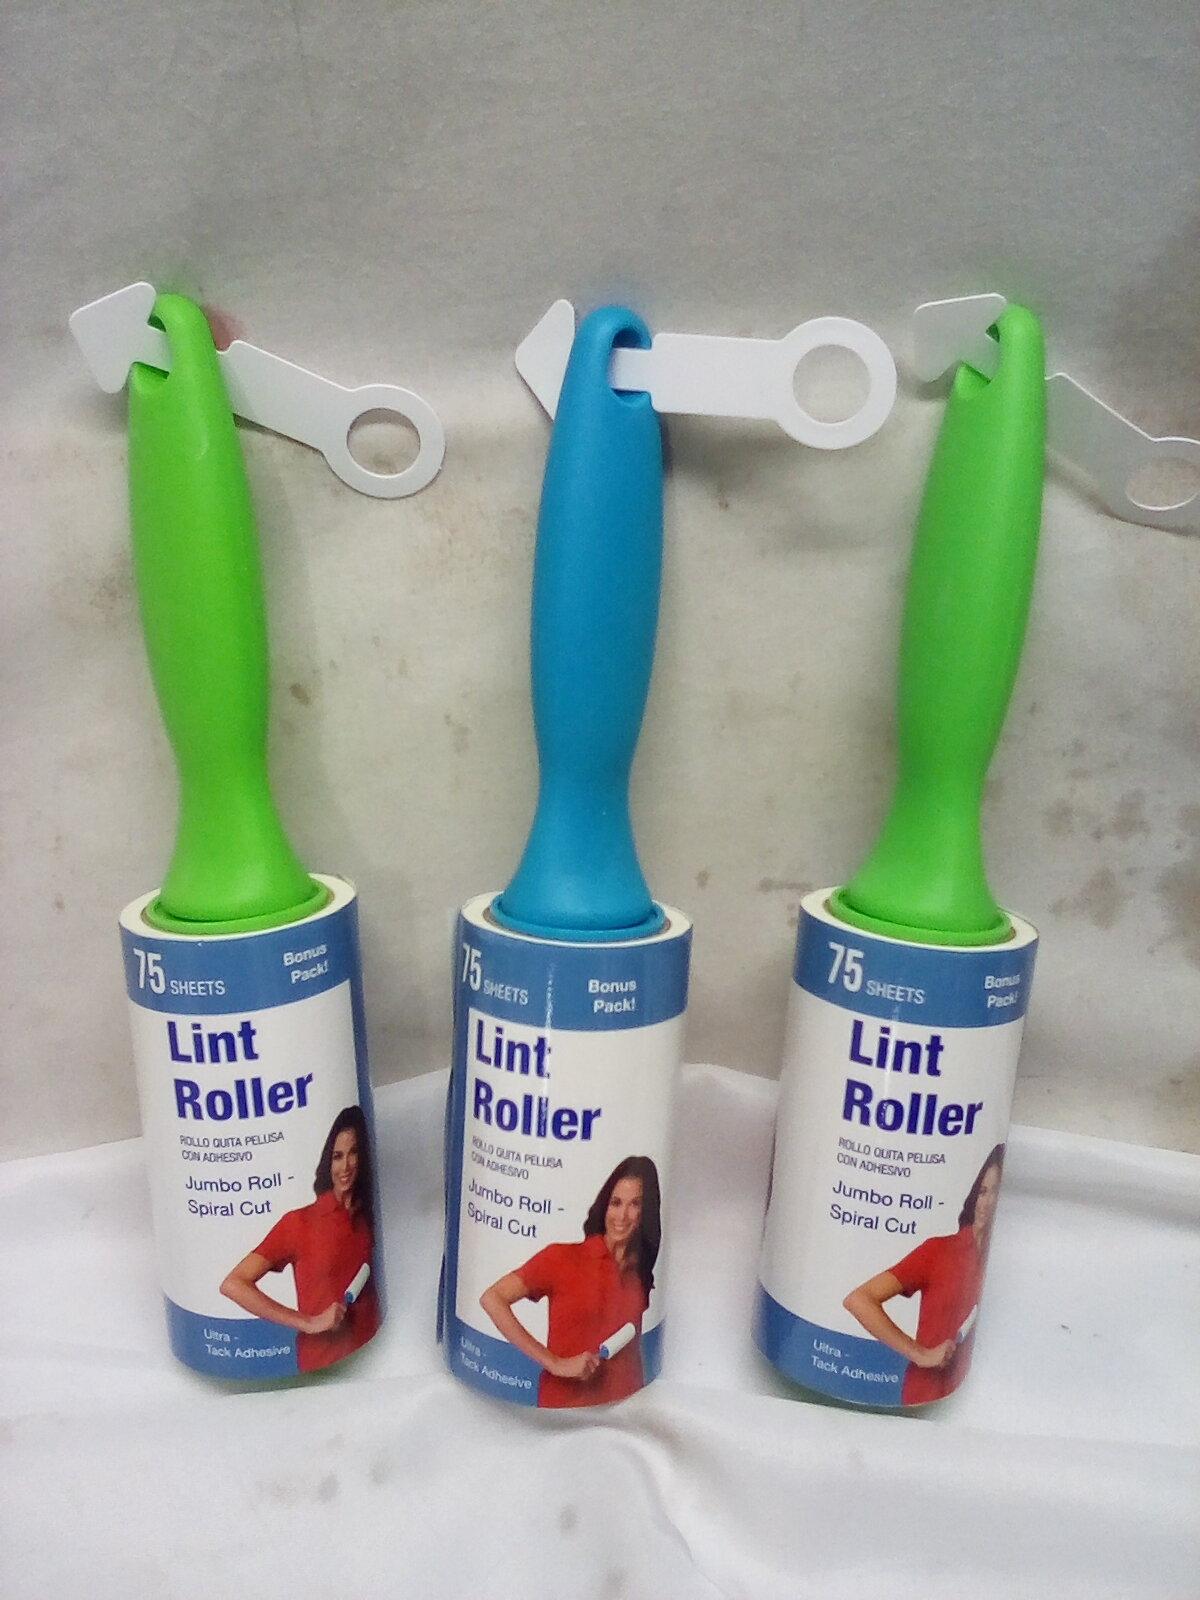 Lint Rollers- Qty 3. 75 Sheets Each.